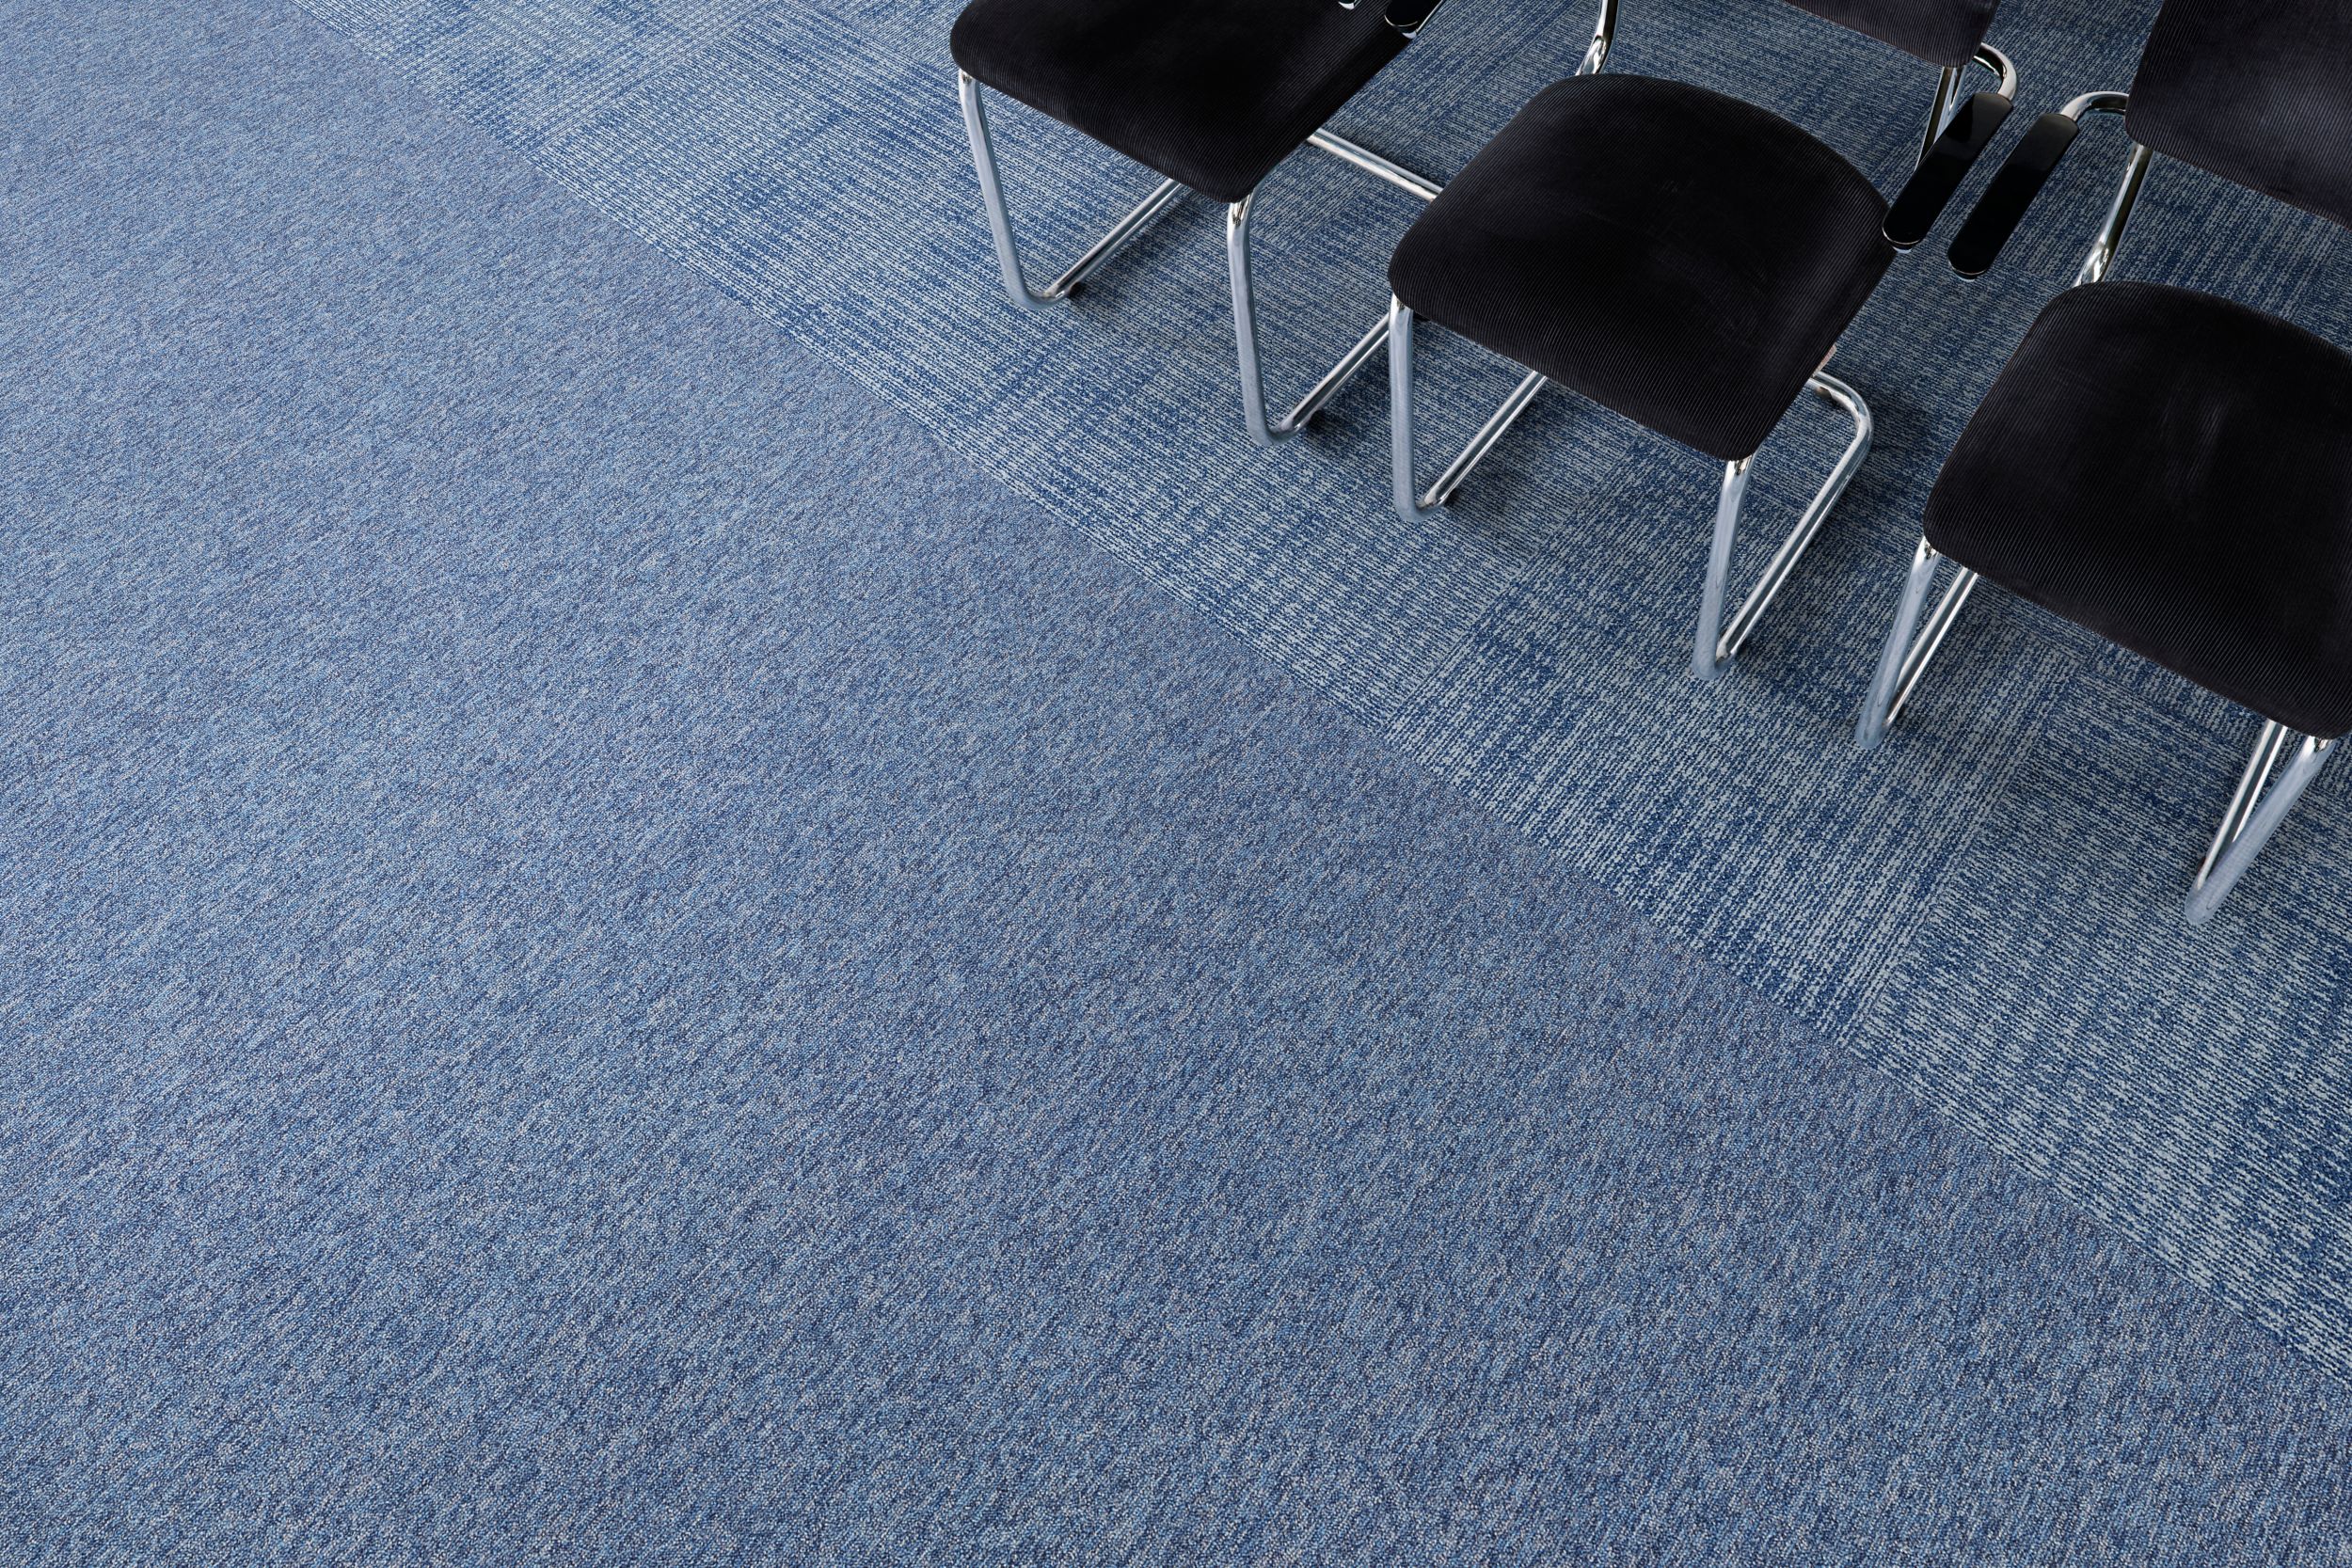 Employ Loop: Employ Collection Carpet Tile by Interface